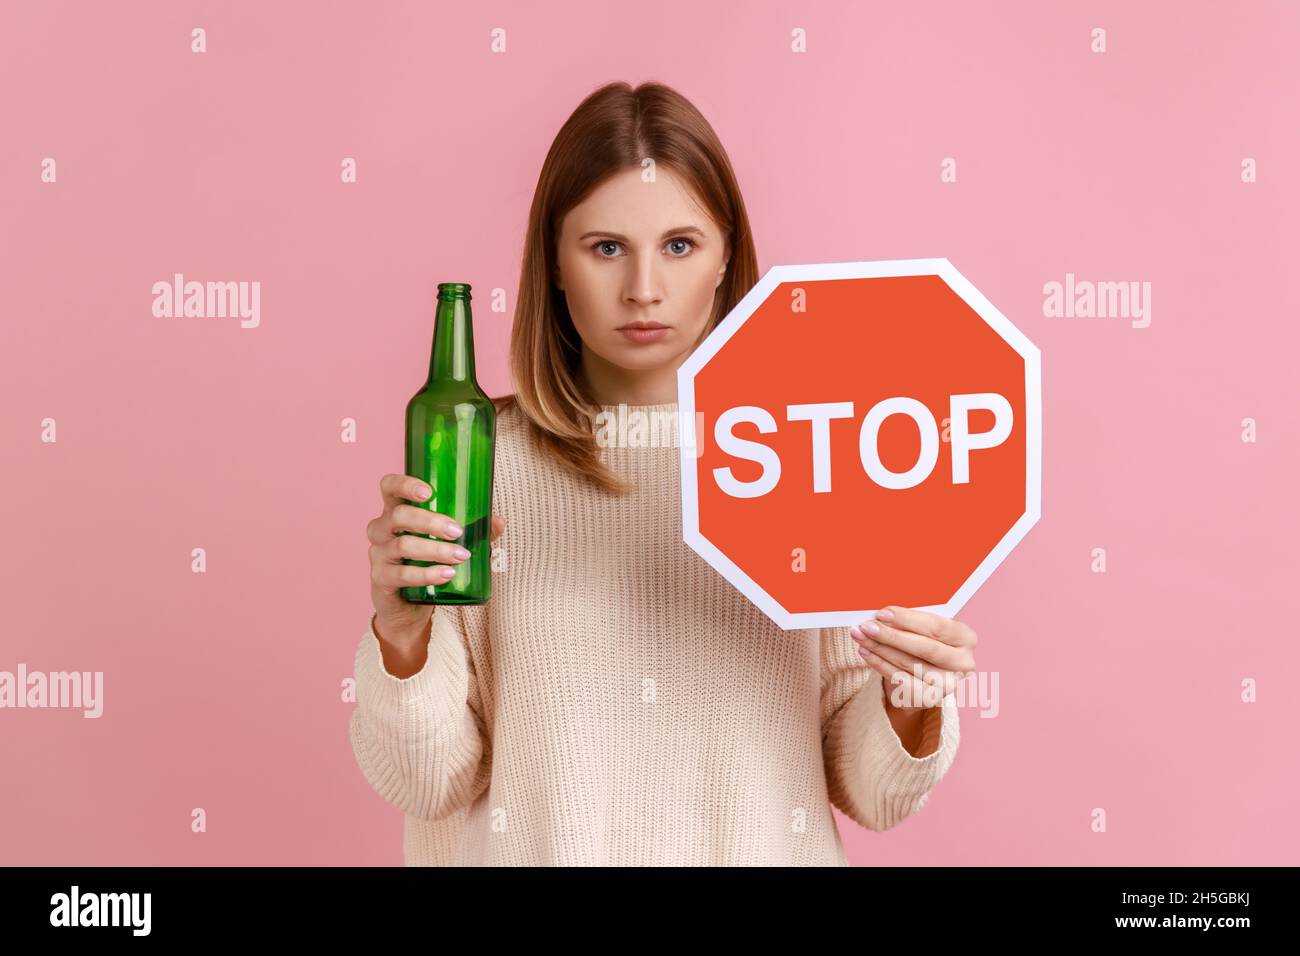 Portrait of serious blond woman holding red stop sign and bottle with alcoholic beverage, calls on dont drink alcohol, wearing white sweater. Indoor studio shot isolated on pink background. Stock Photo